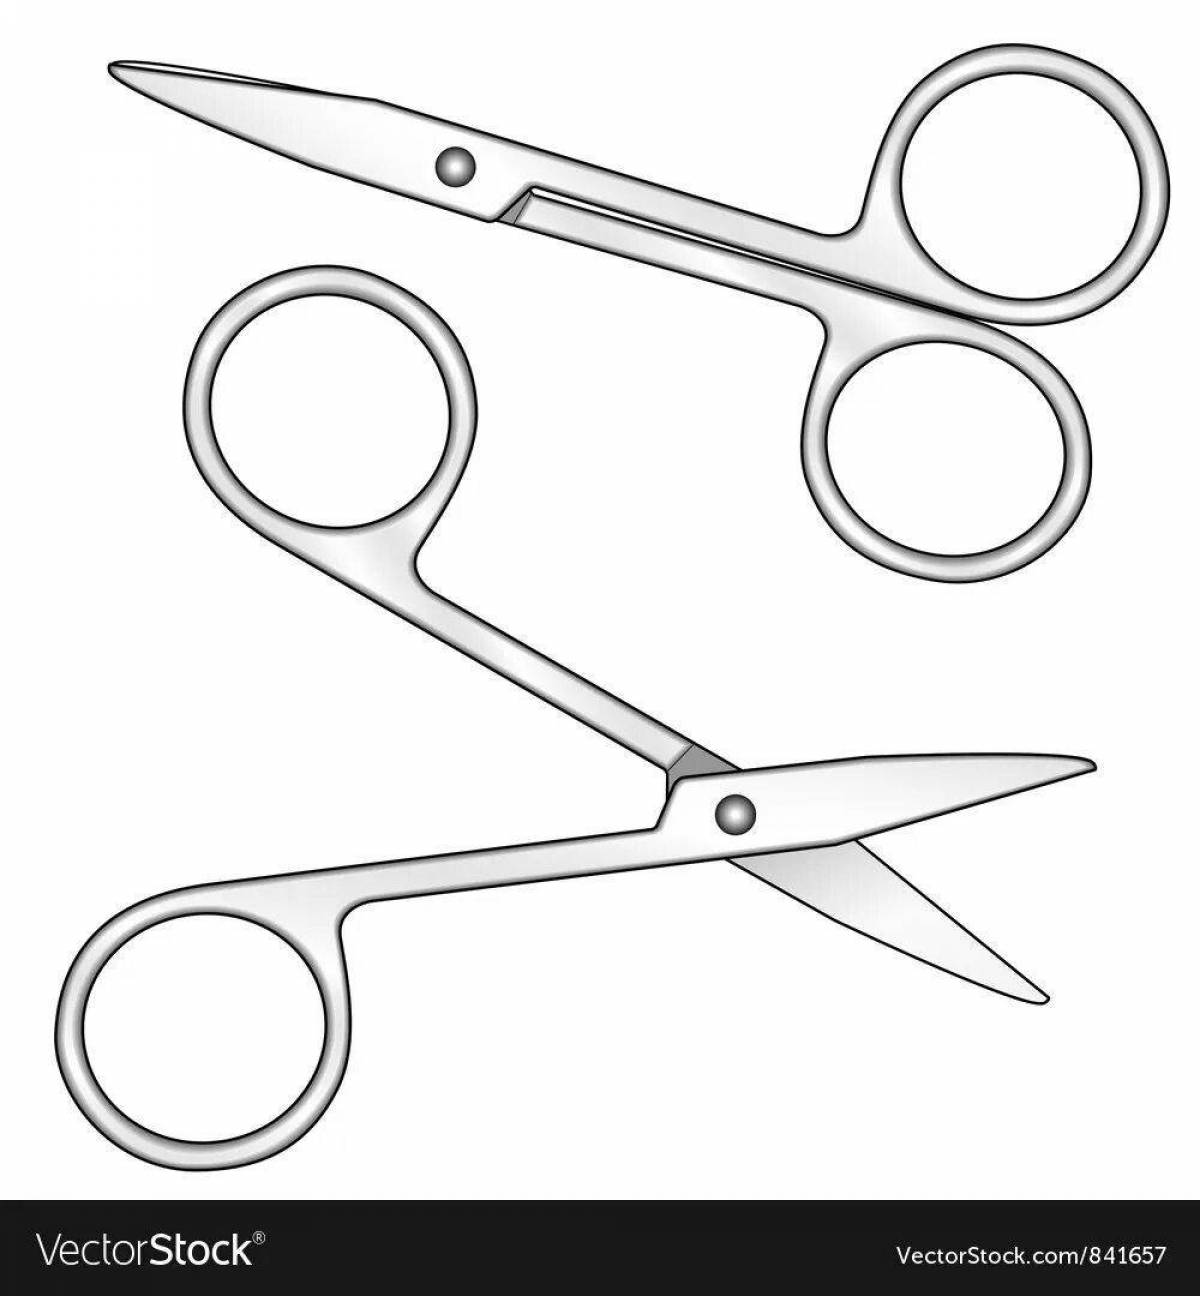 Playful scissors coloring page for kids